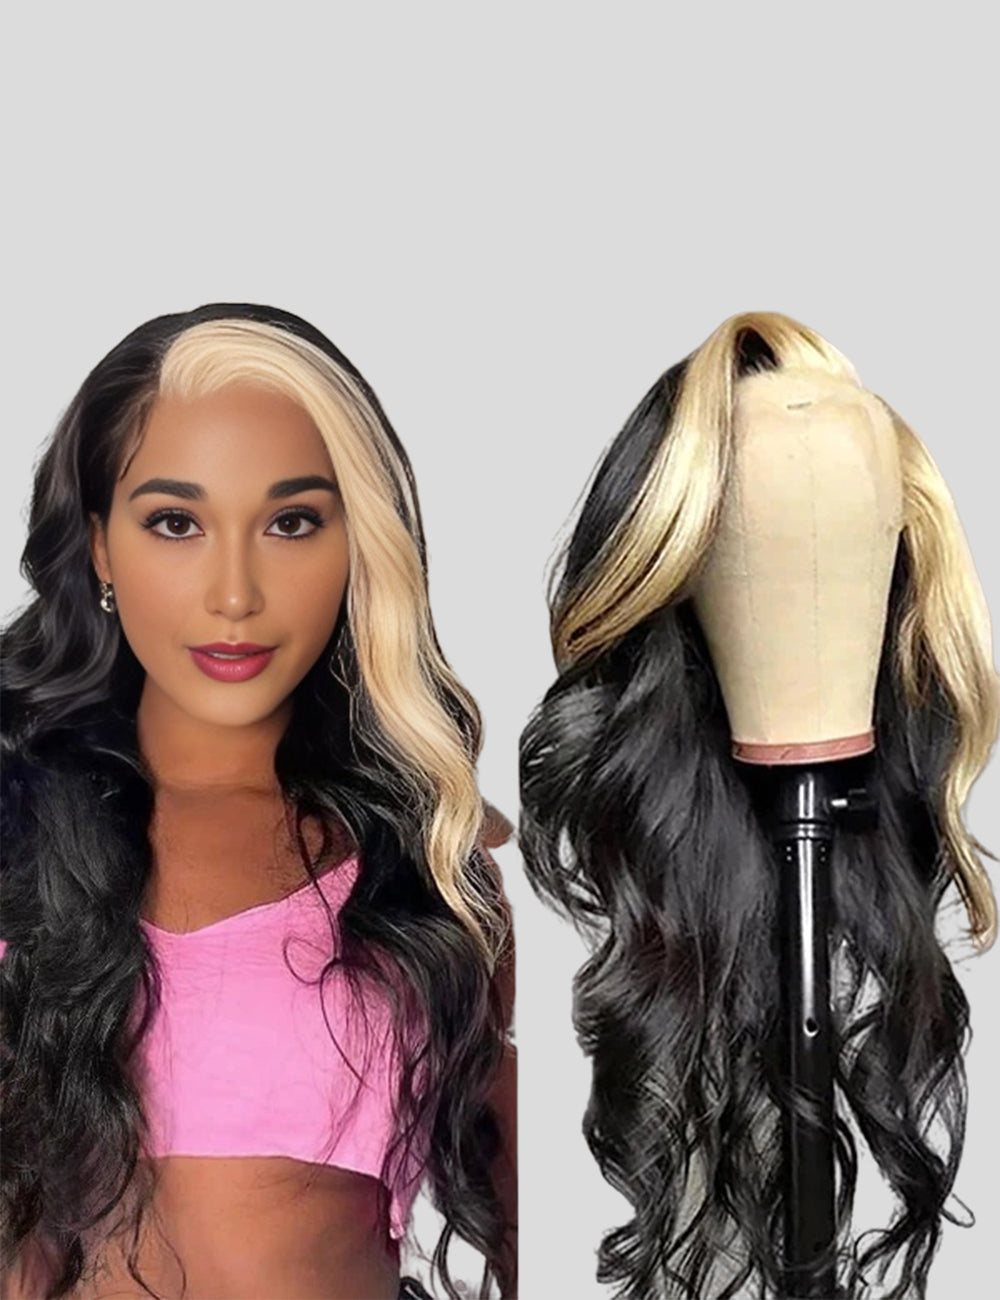 Skunk Stripe Hair Body Wave Front Wigs 30 Inch Lace Front Wigs with Baby Hair Colored Human Hair Wigs